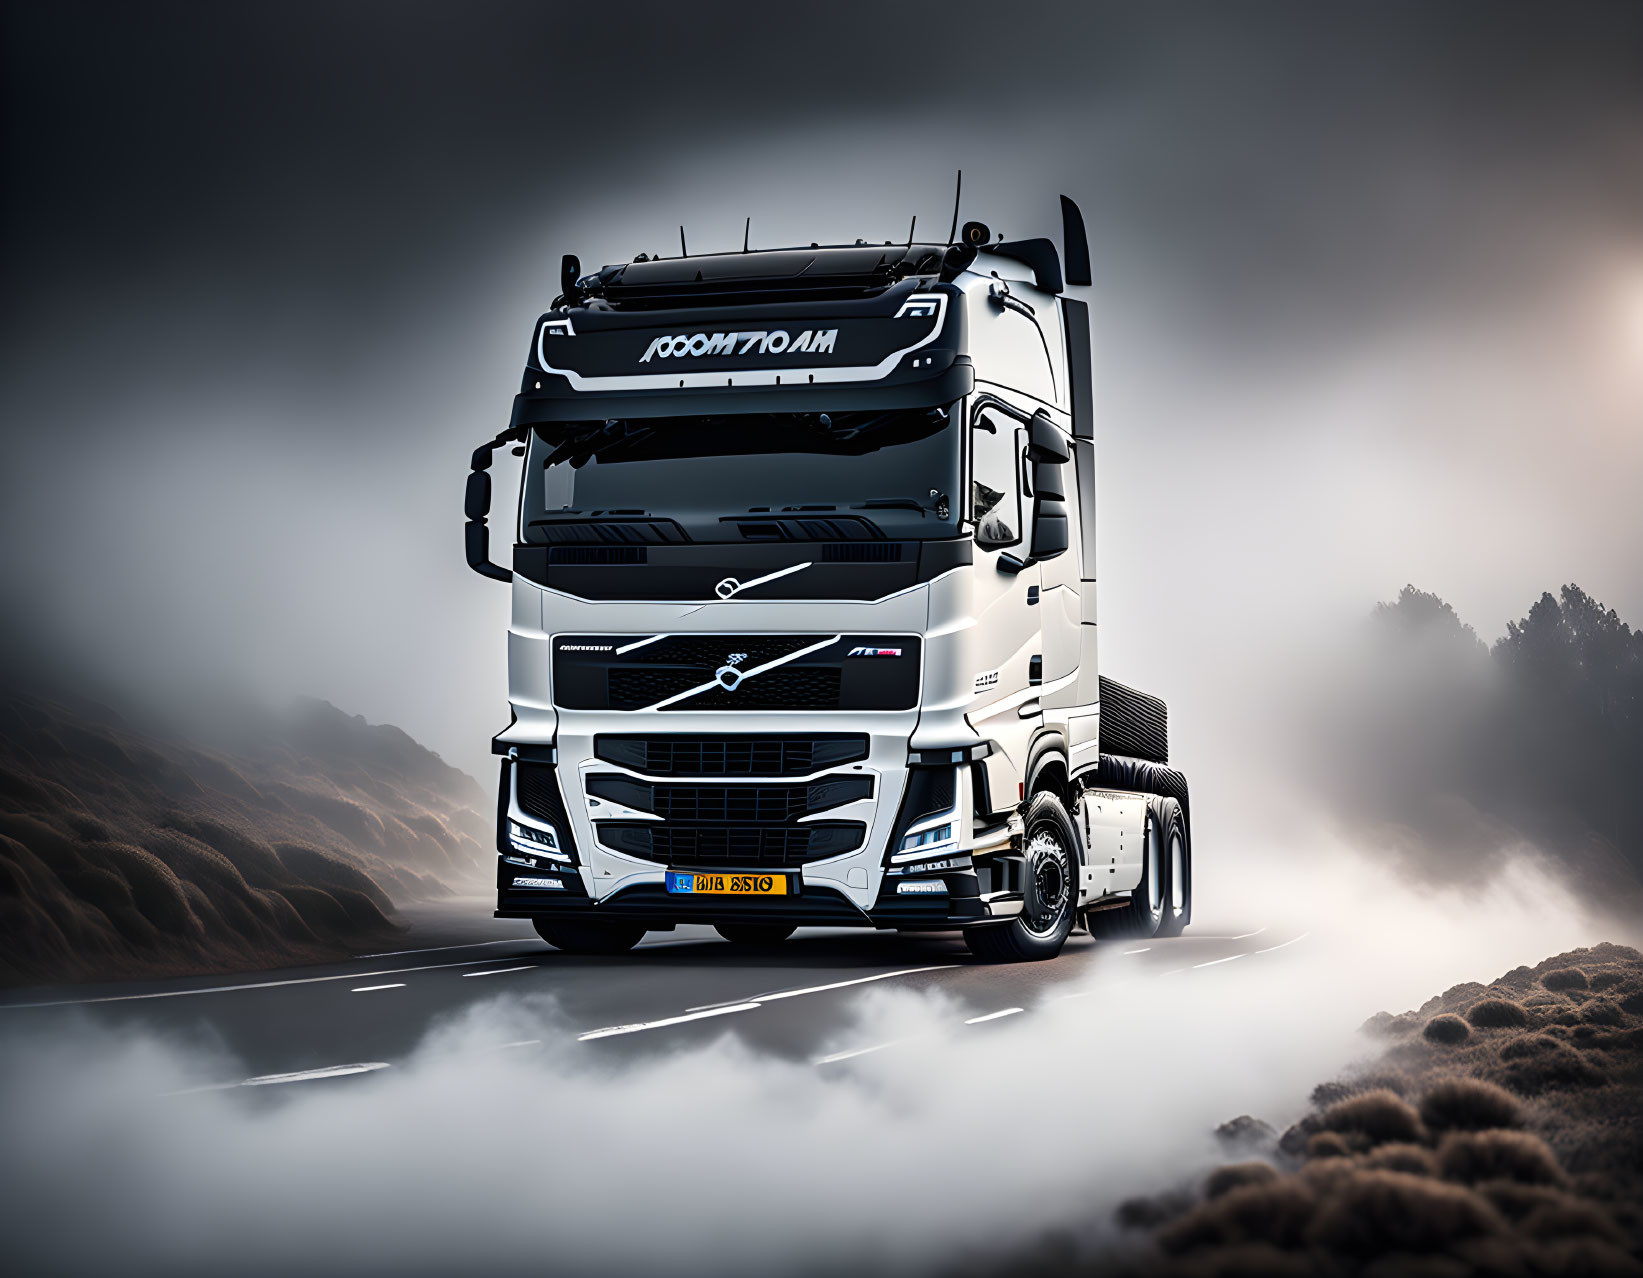 White Volvo semi-truck on foggy road with moody lighting and sleek design